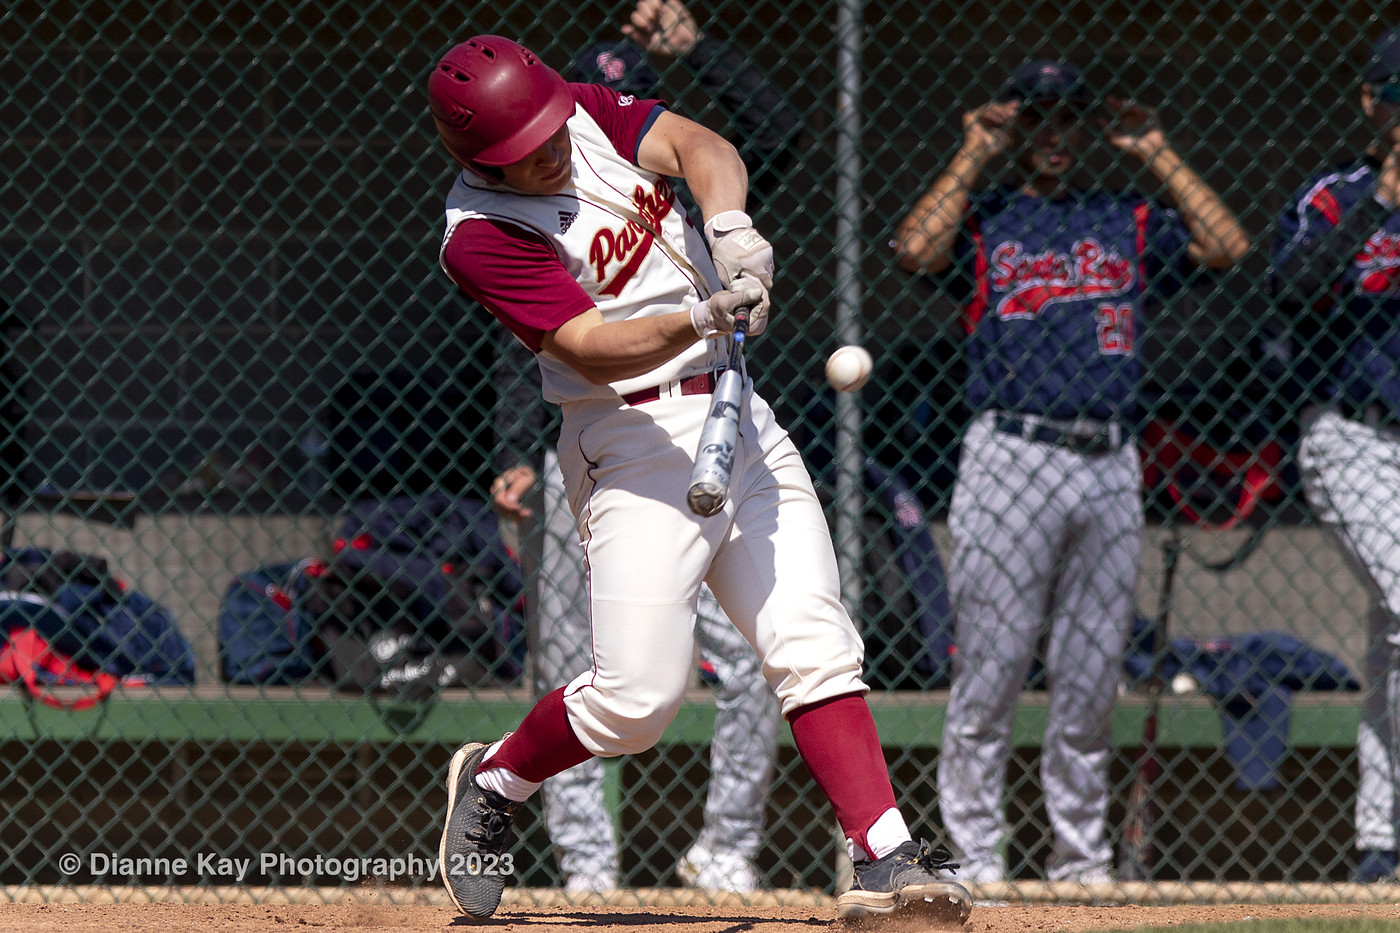 Sac City beats ARC 9-5 to sweep the season series; Isola, Rogalski, Hamilton and Barry all had multiple hits in the win